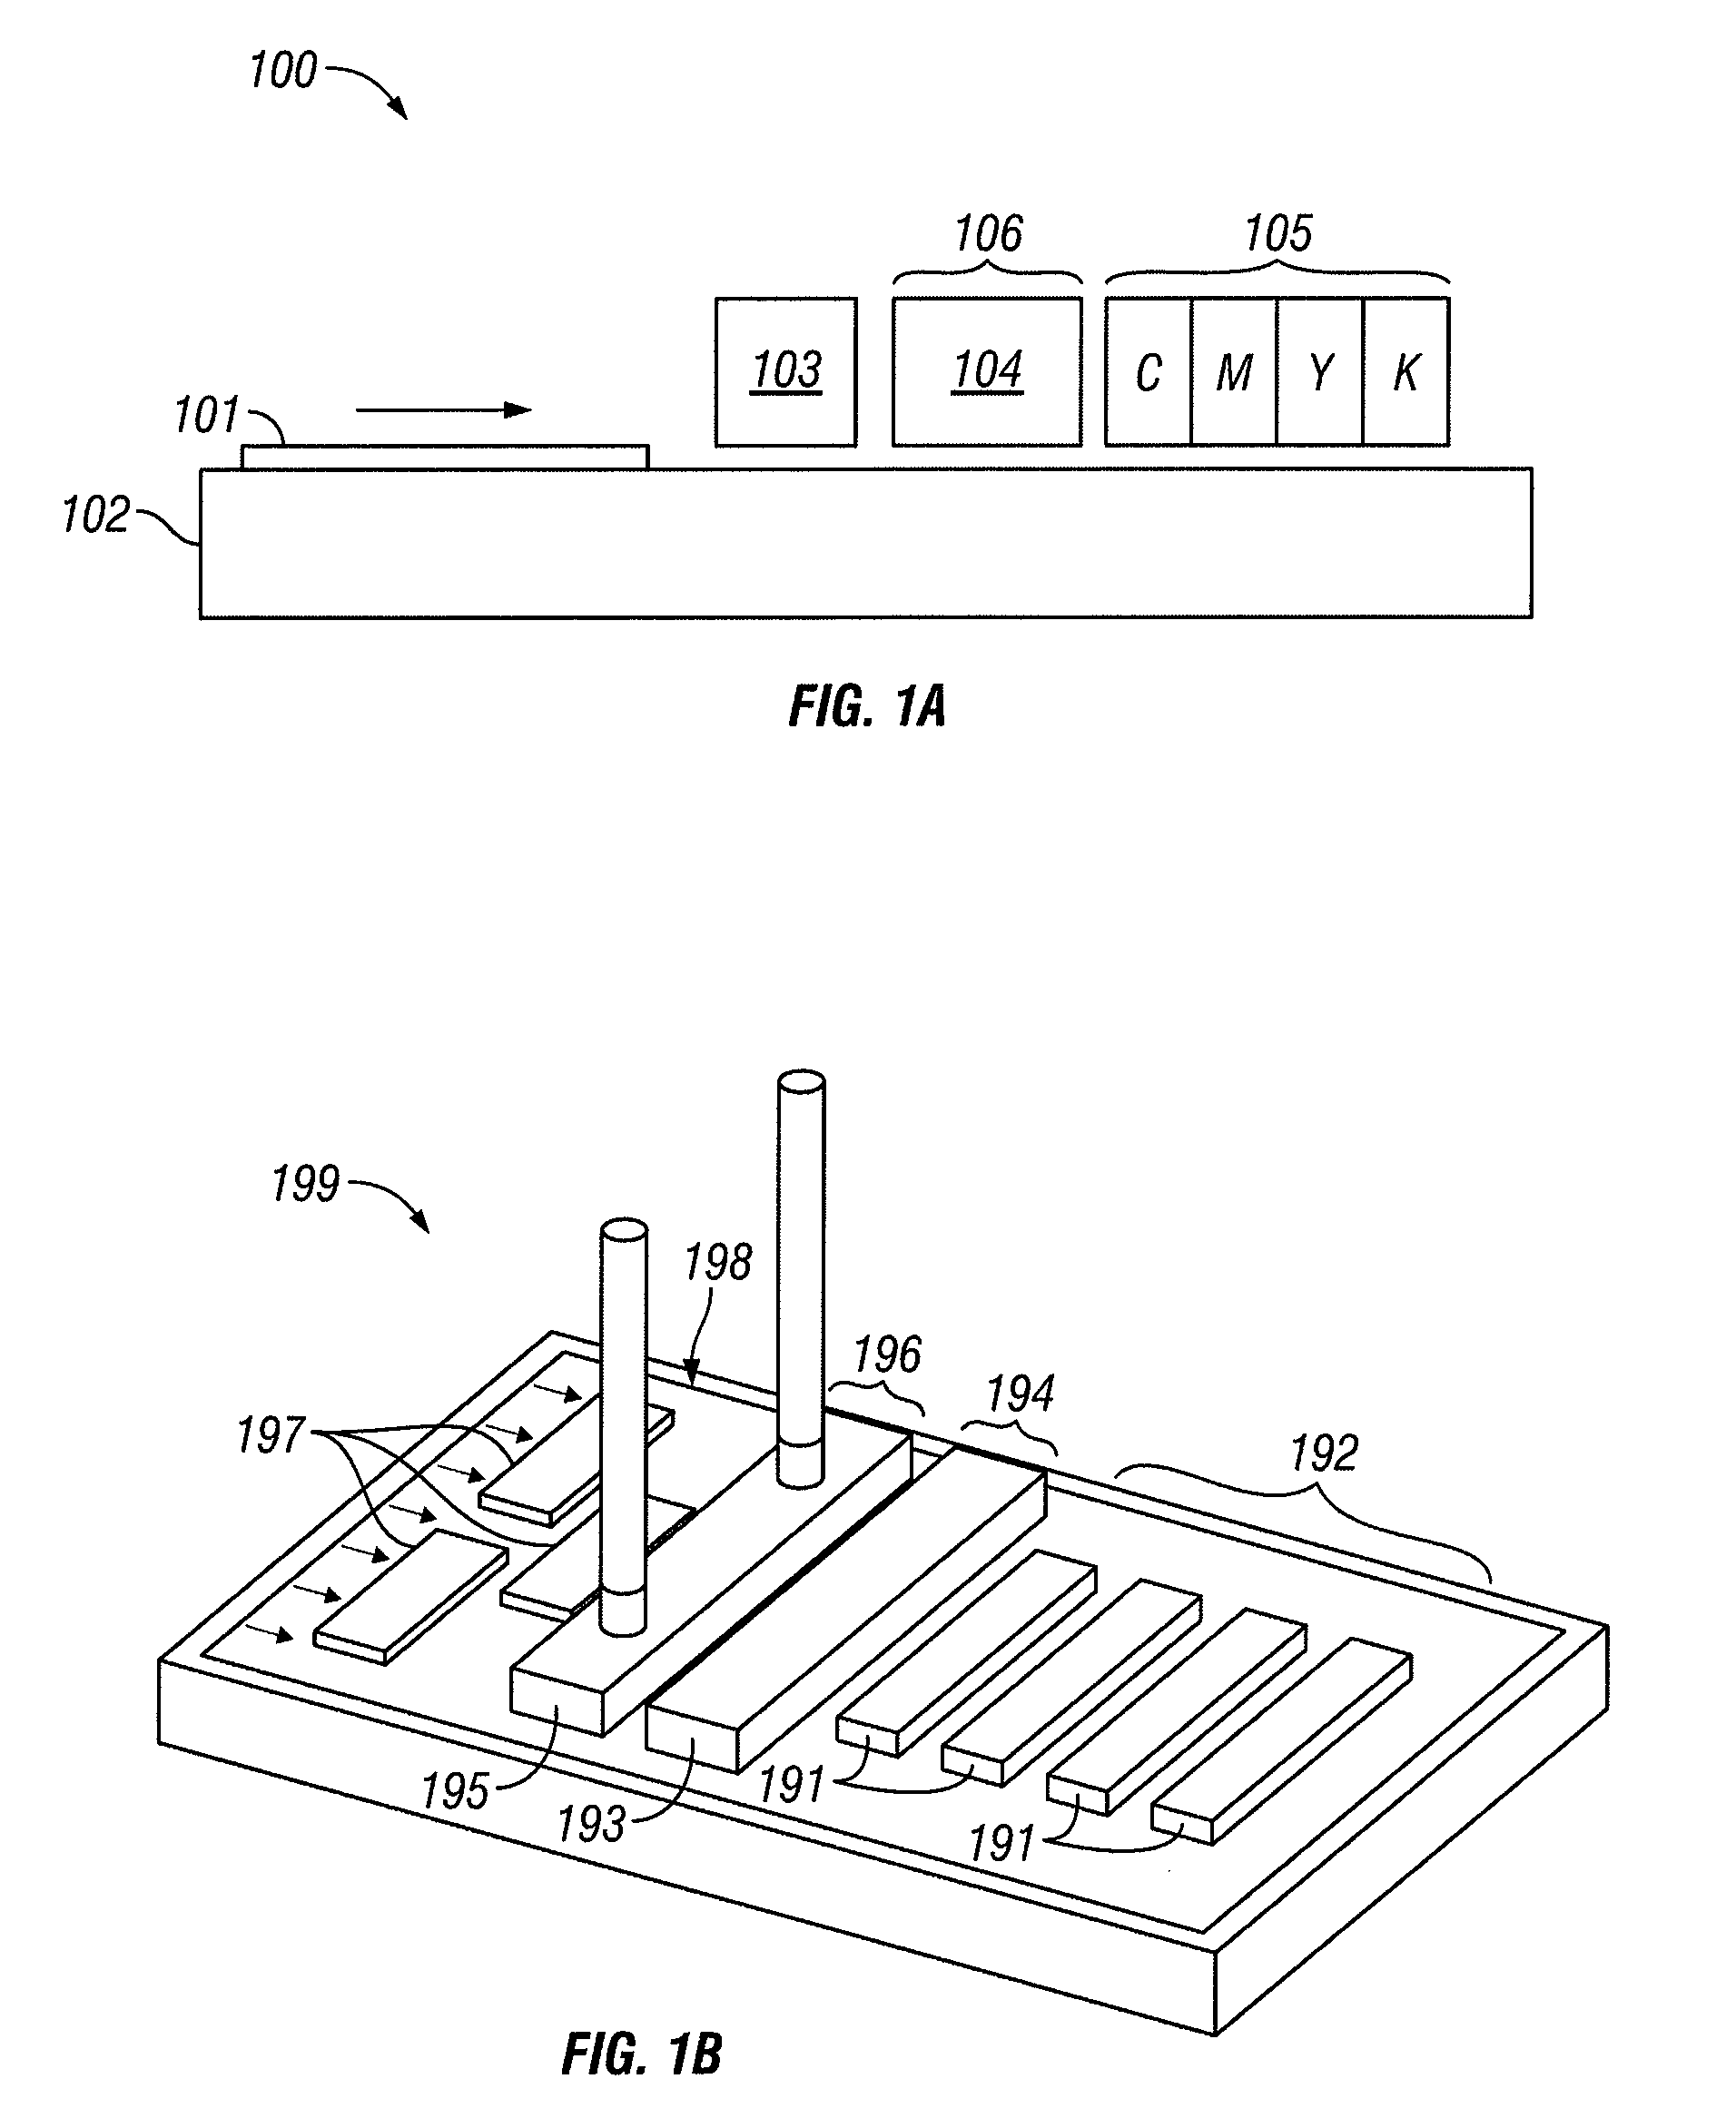 InkJet printer with controlled oxygen levels